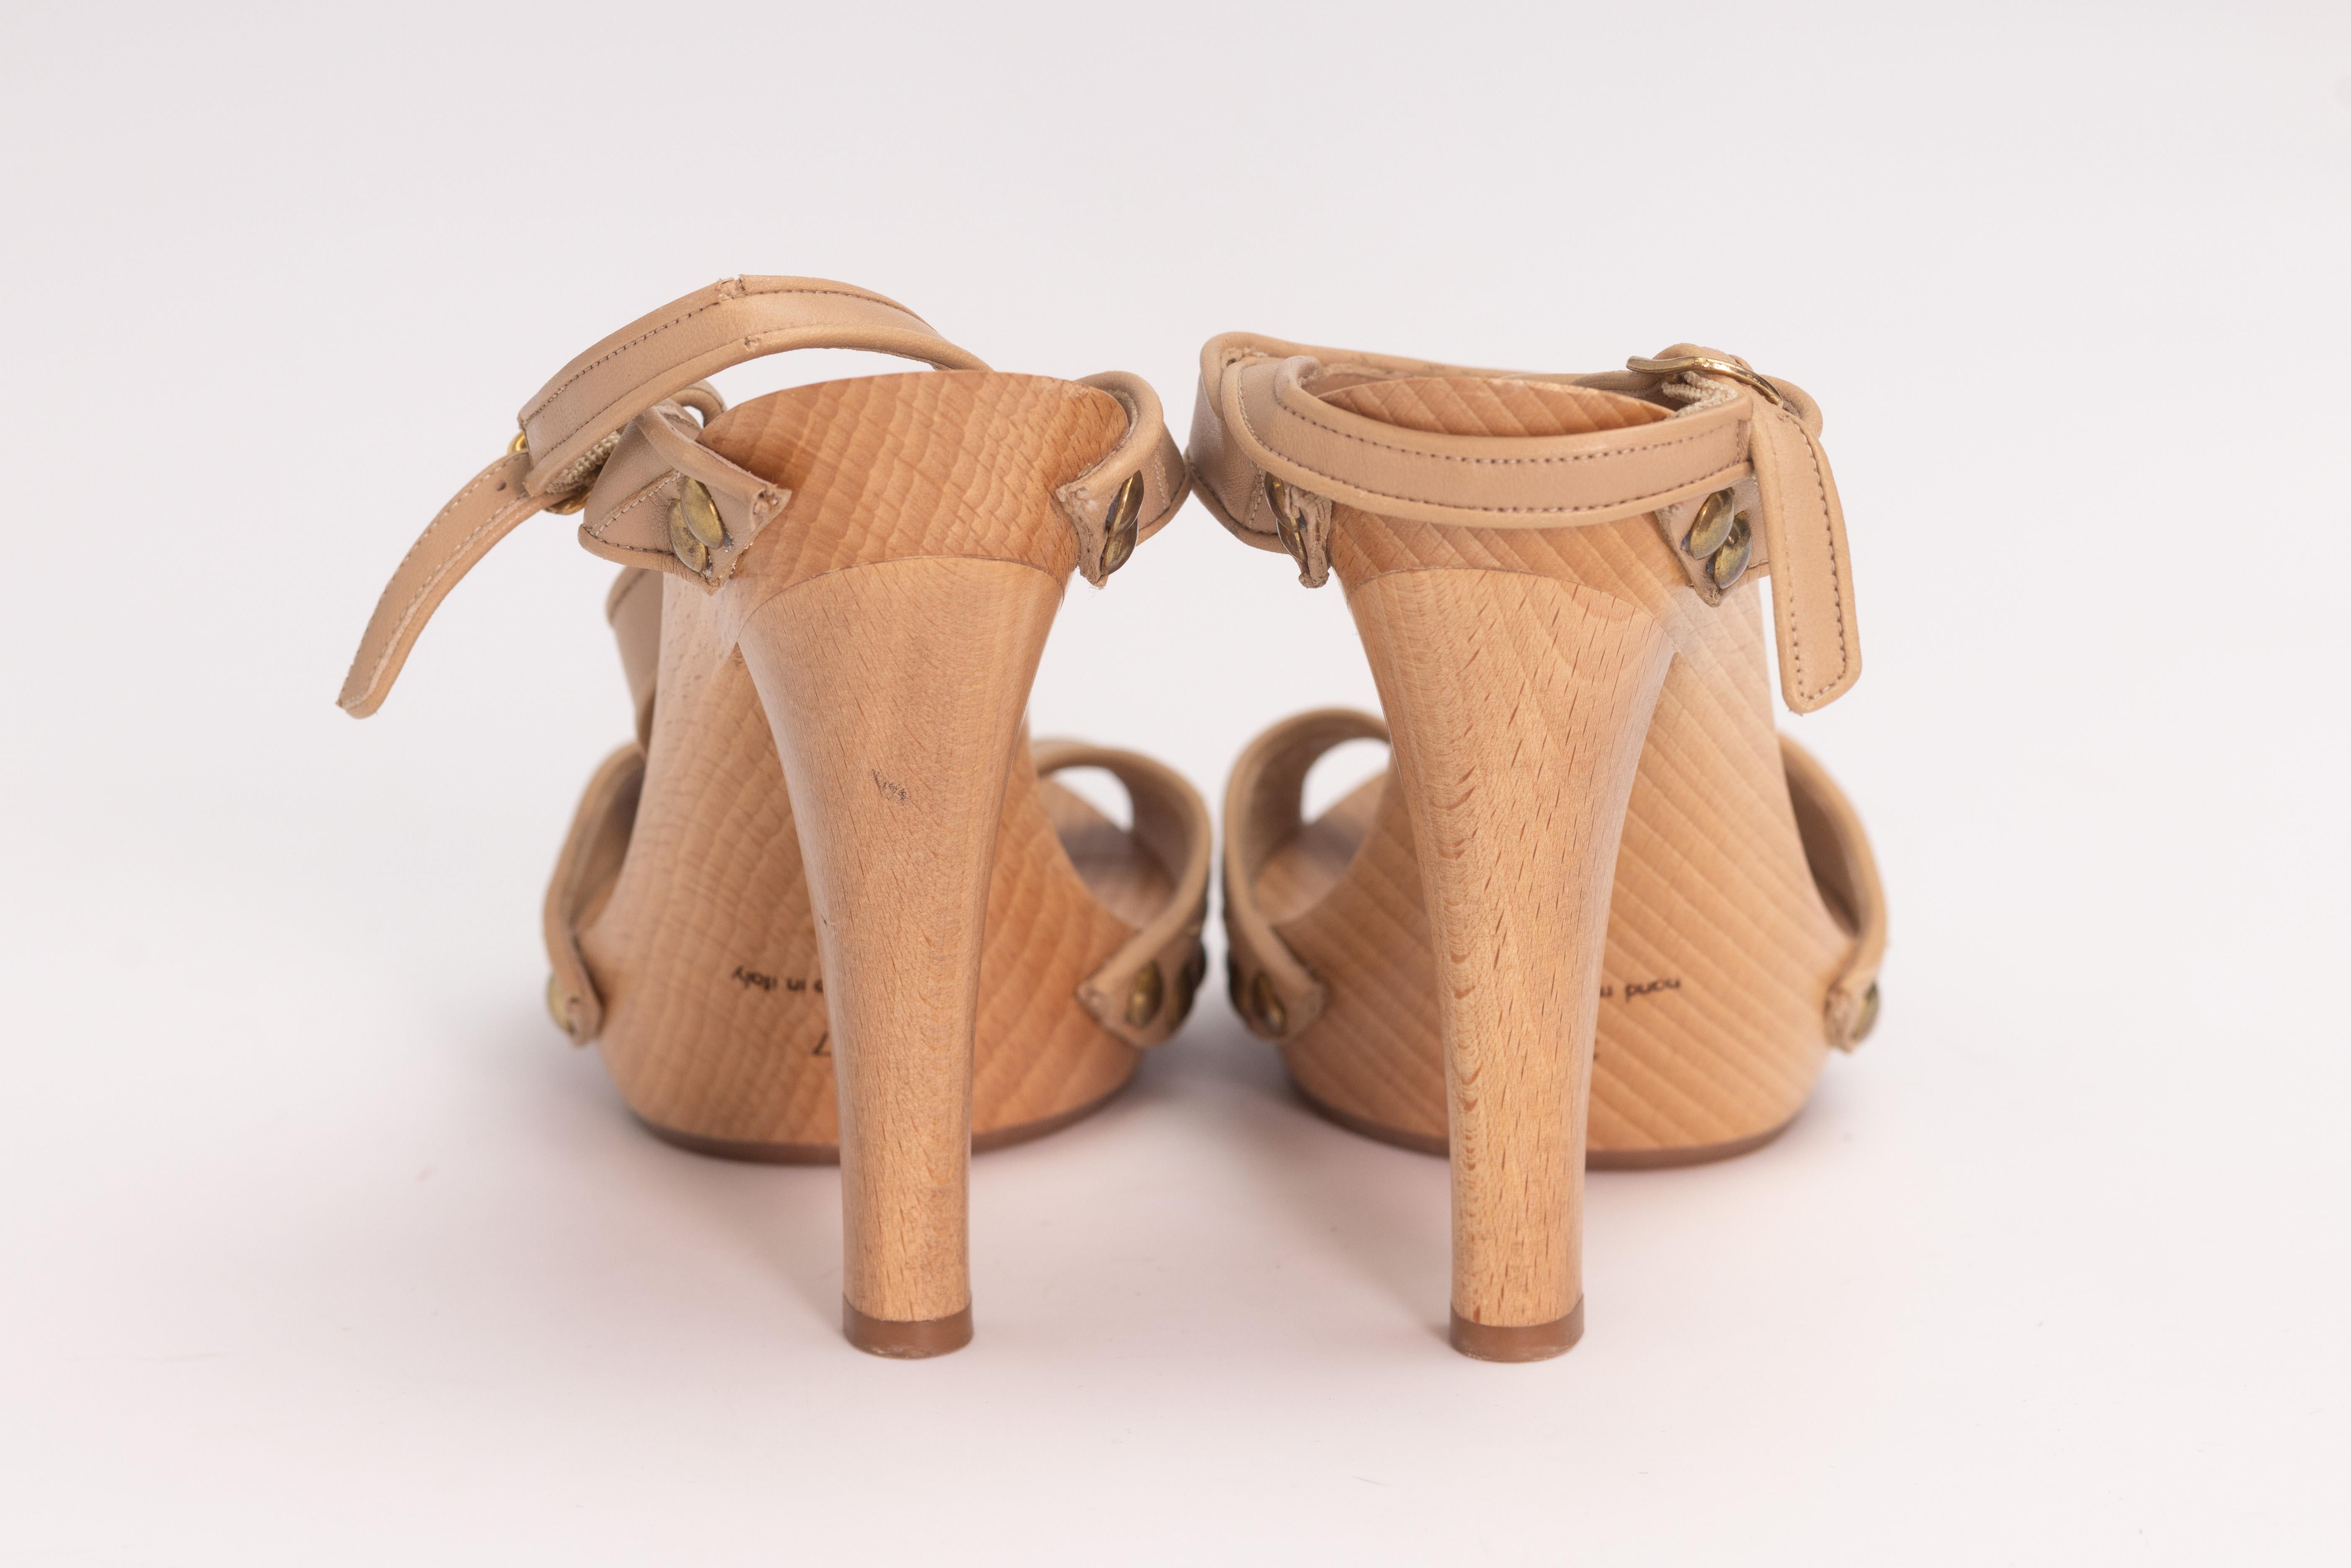 Manolo Blahnik Leather T-strap Wood Studded Sandal Heels (EU 37) In Good Condition For Sale In Montreal, Quebec